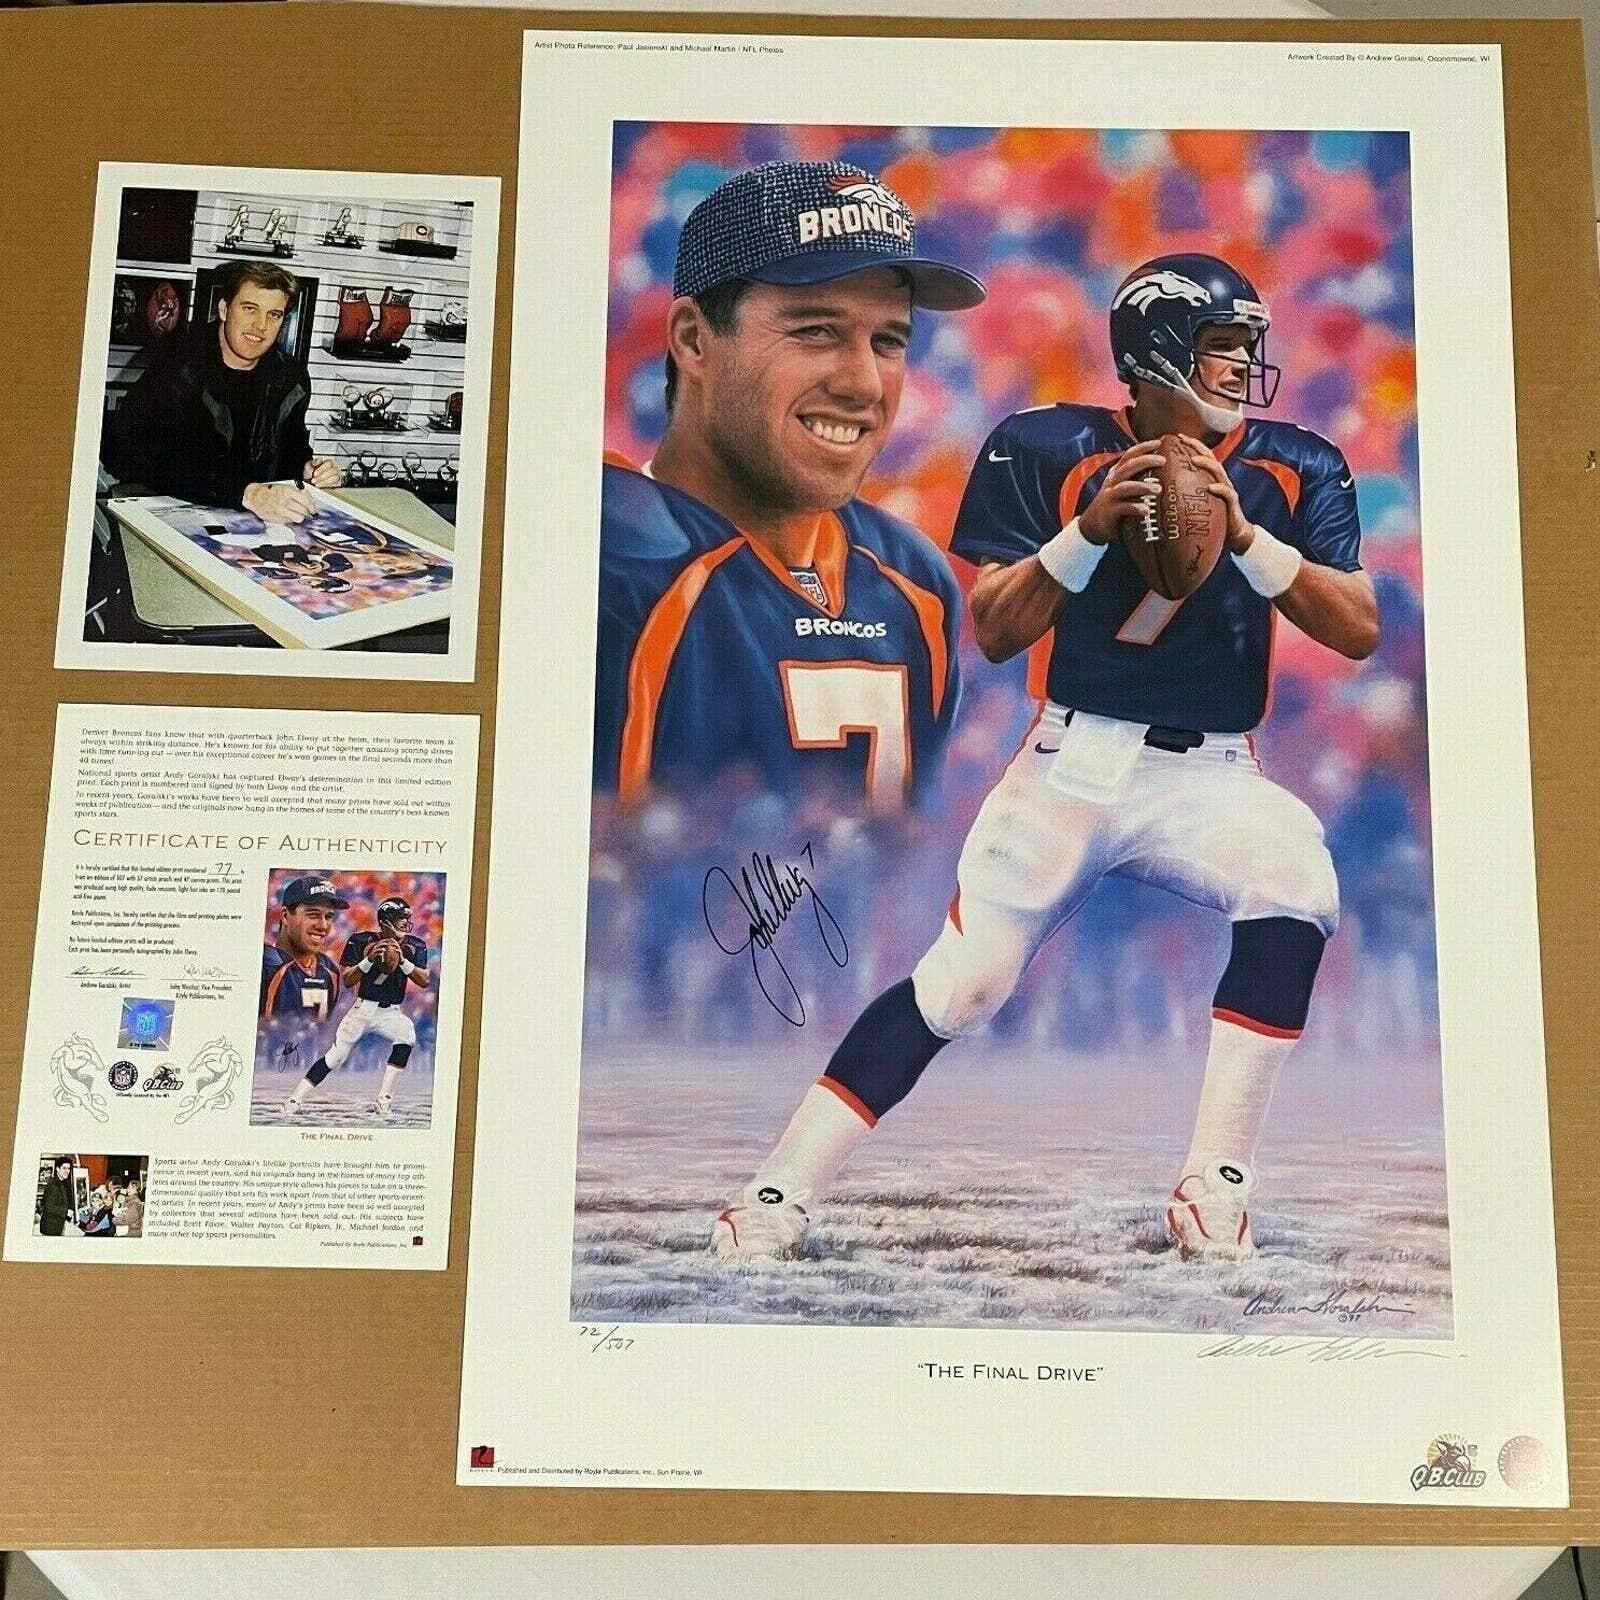 The Final Drive Vintage John Elway Print 72/507 Signed By Artist And Elway 21x30